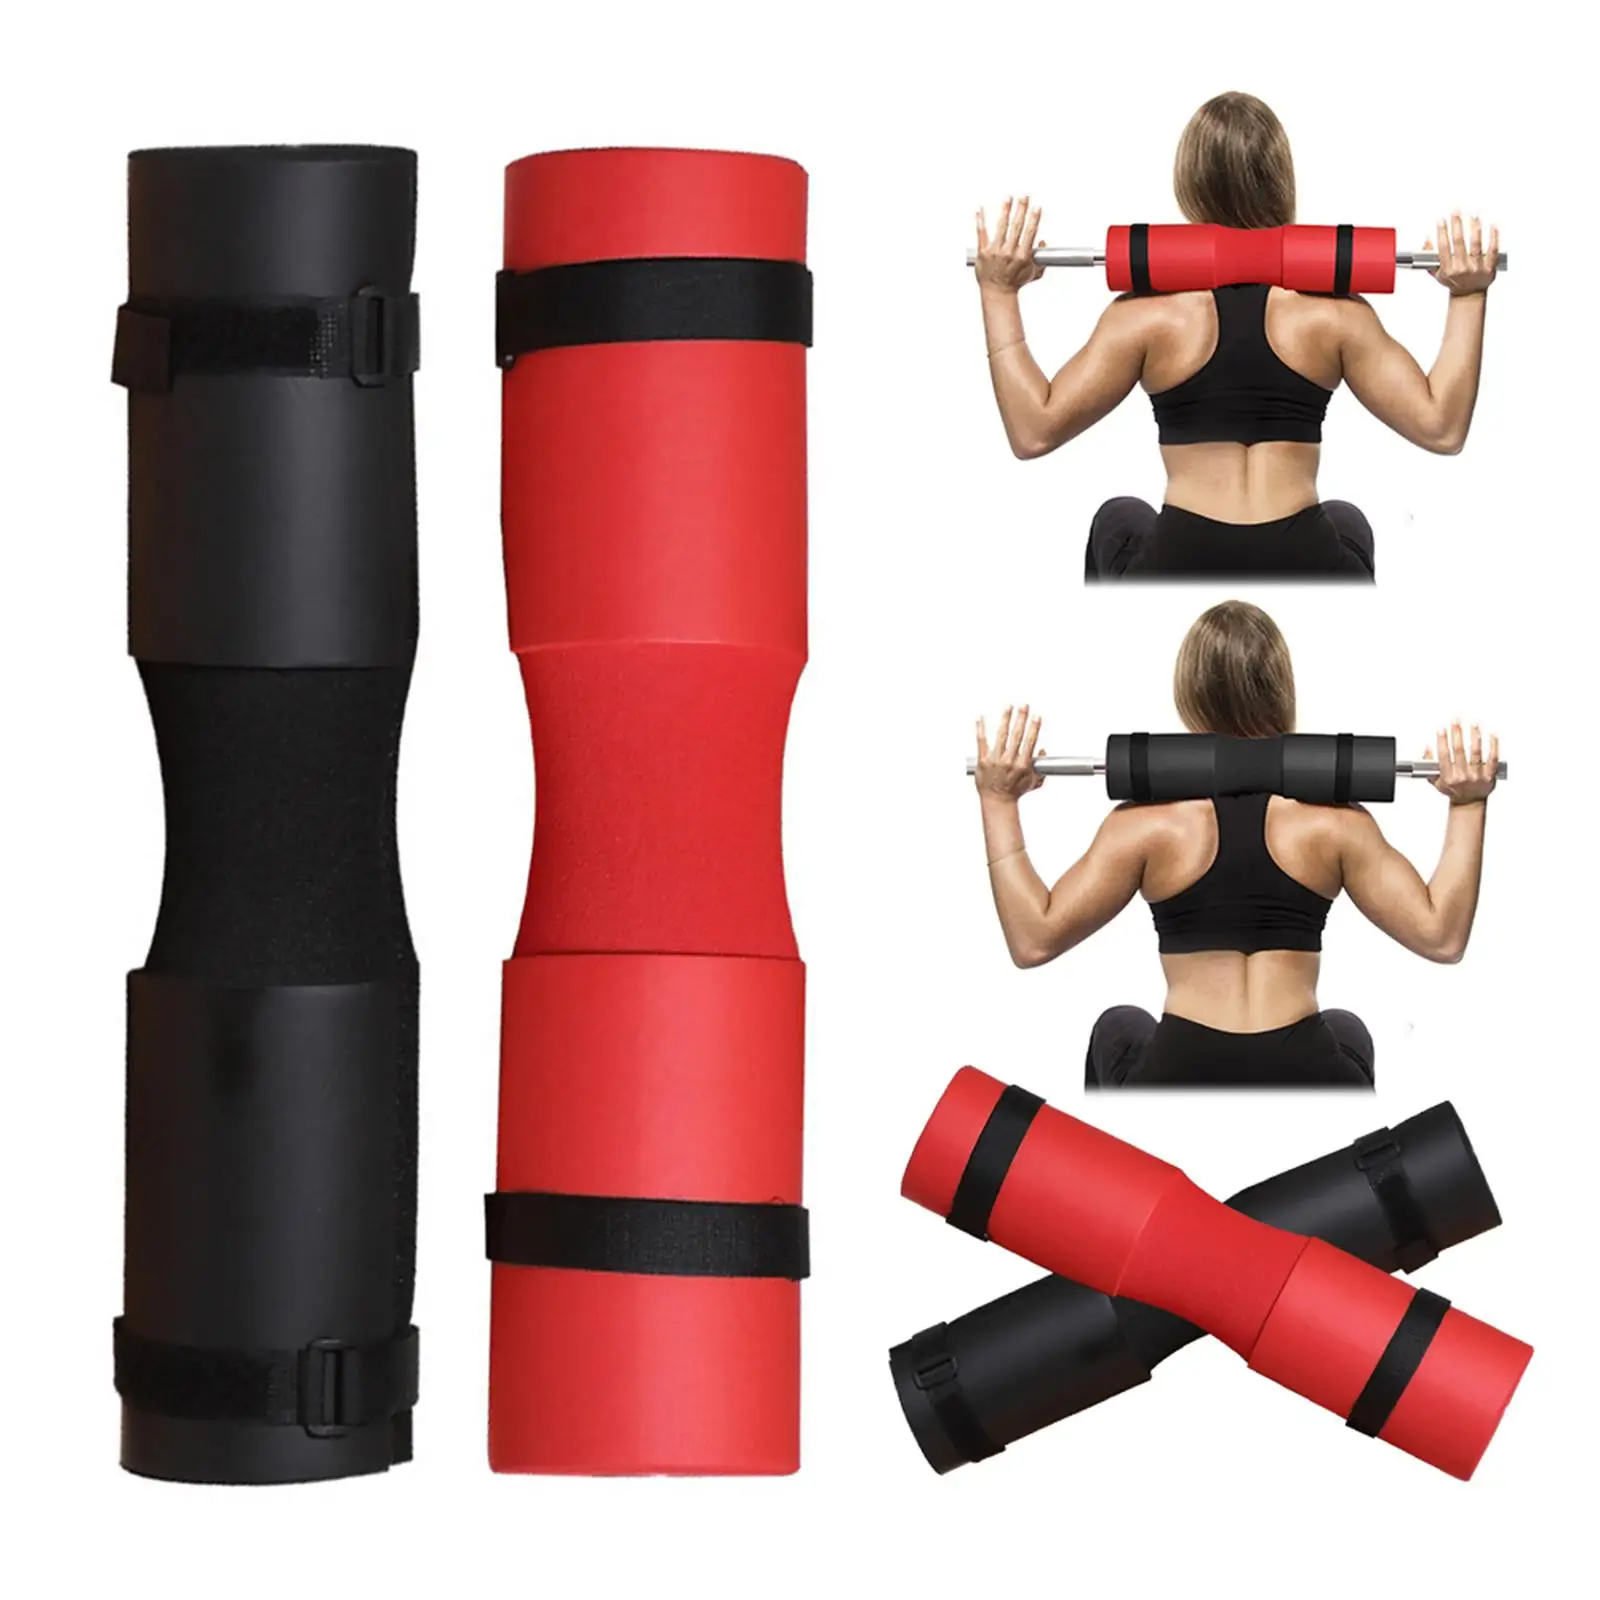 Standard Barbell Pad with  Straps Webbing Advanced  Foam Sponge Protective Pad Cushion Protective Grip Accessories